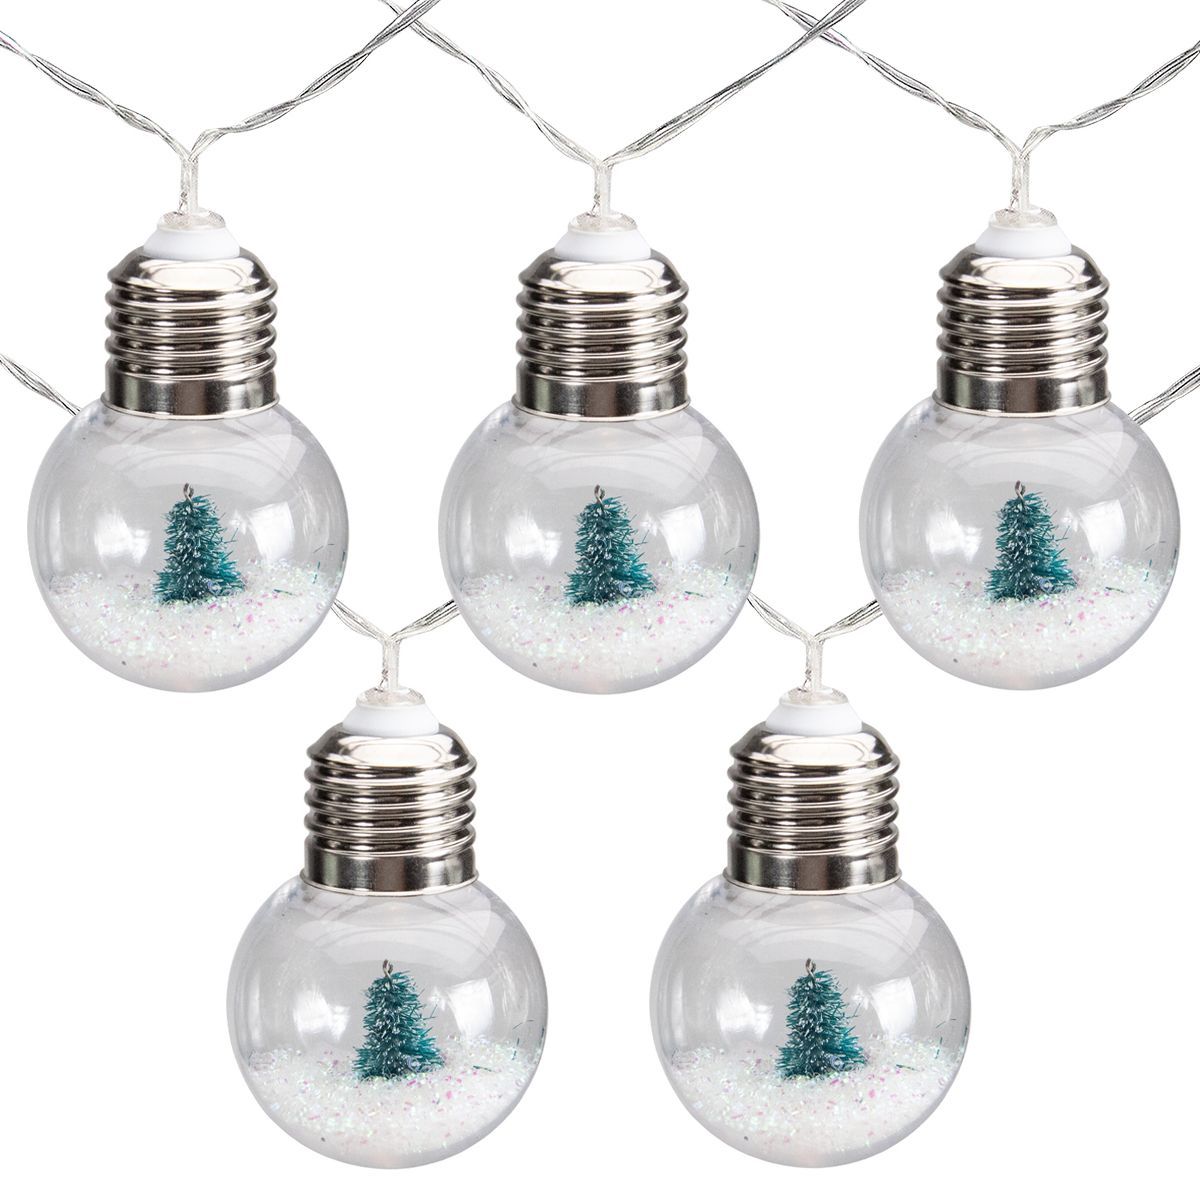 Northlight 10-Count LED Christmas Trees in Bulbs, Warm White Lights, 4.25ft Clear Wire | Target